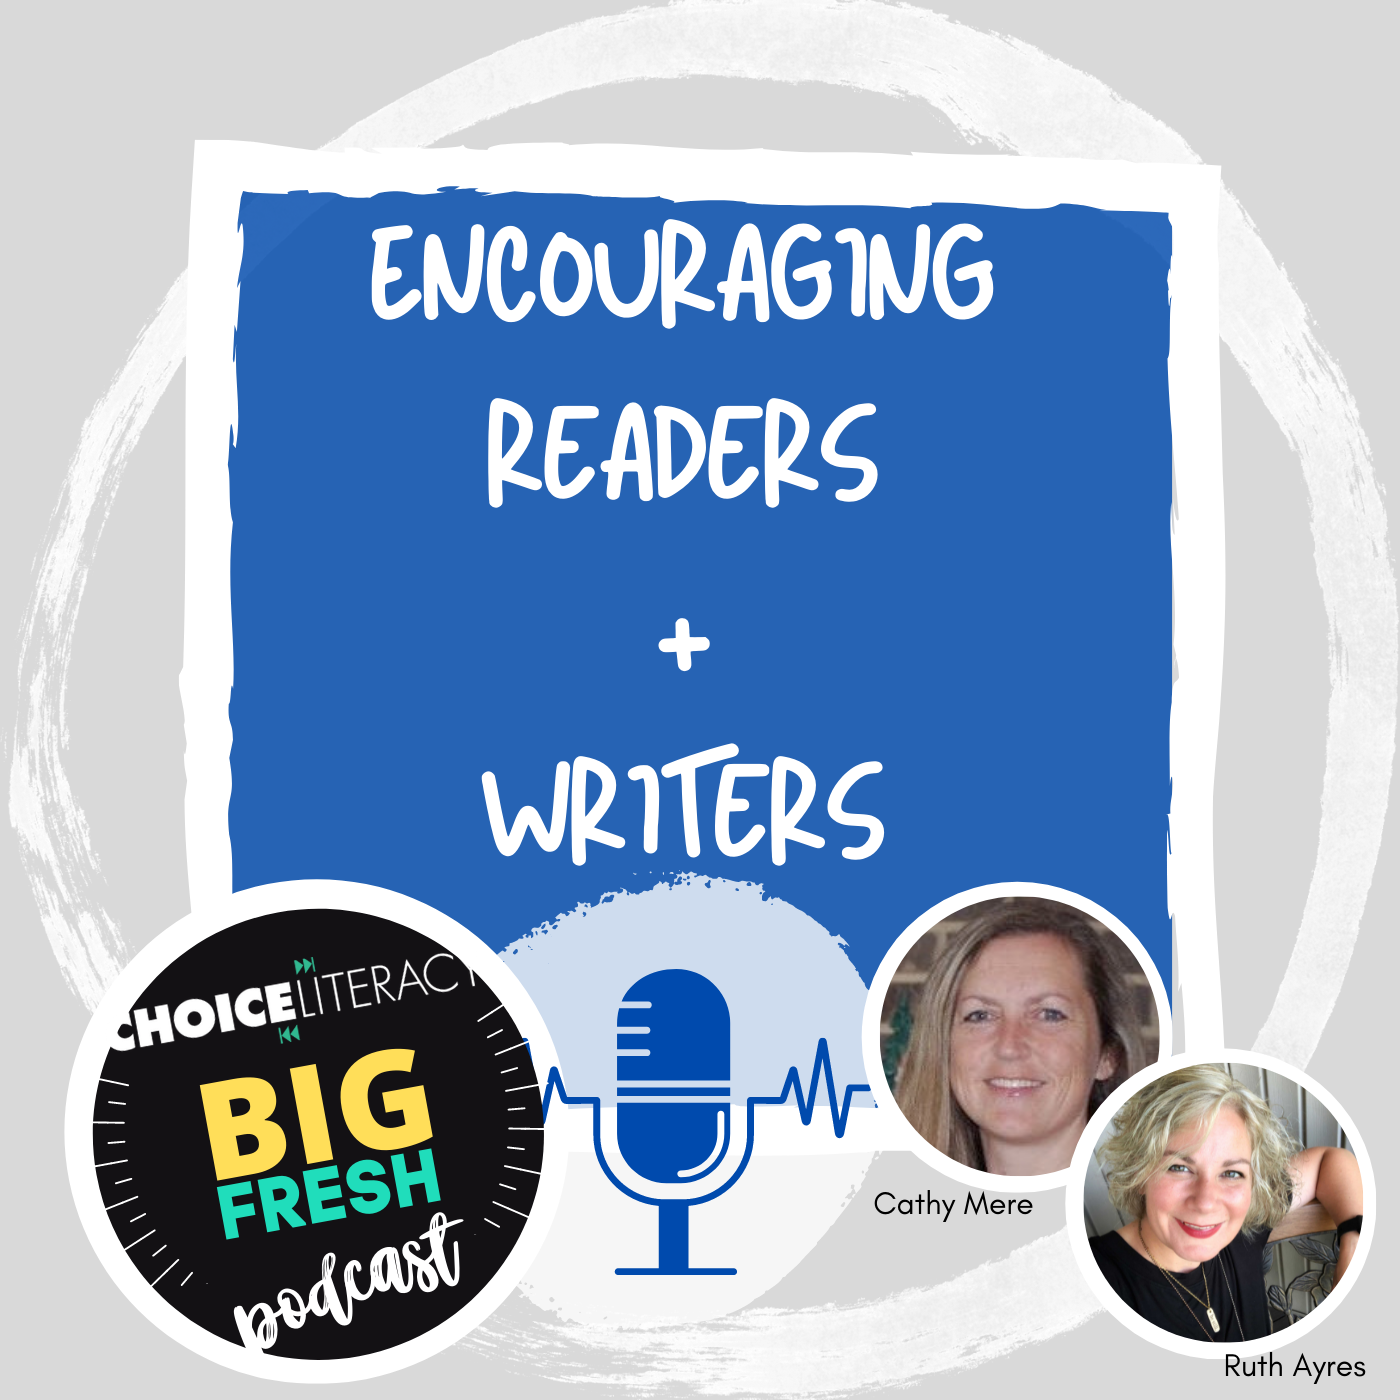 Encouraging Readers and Writers